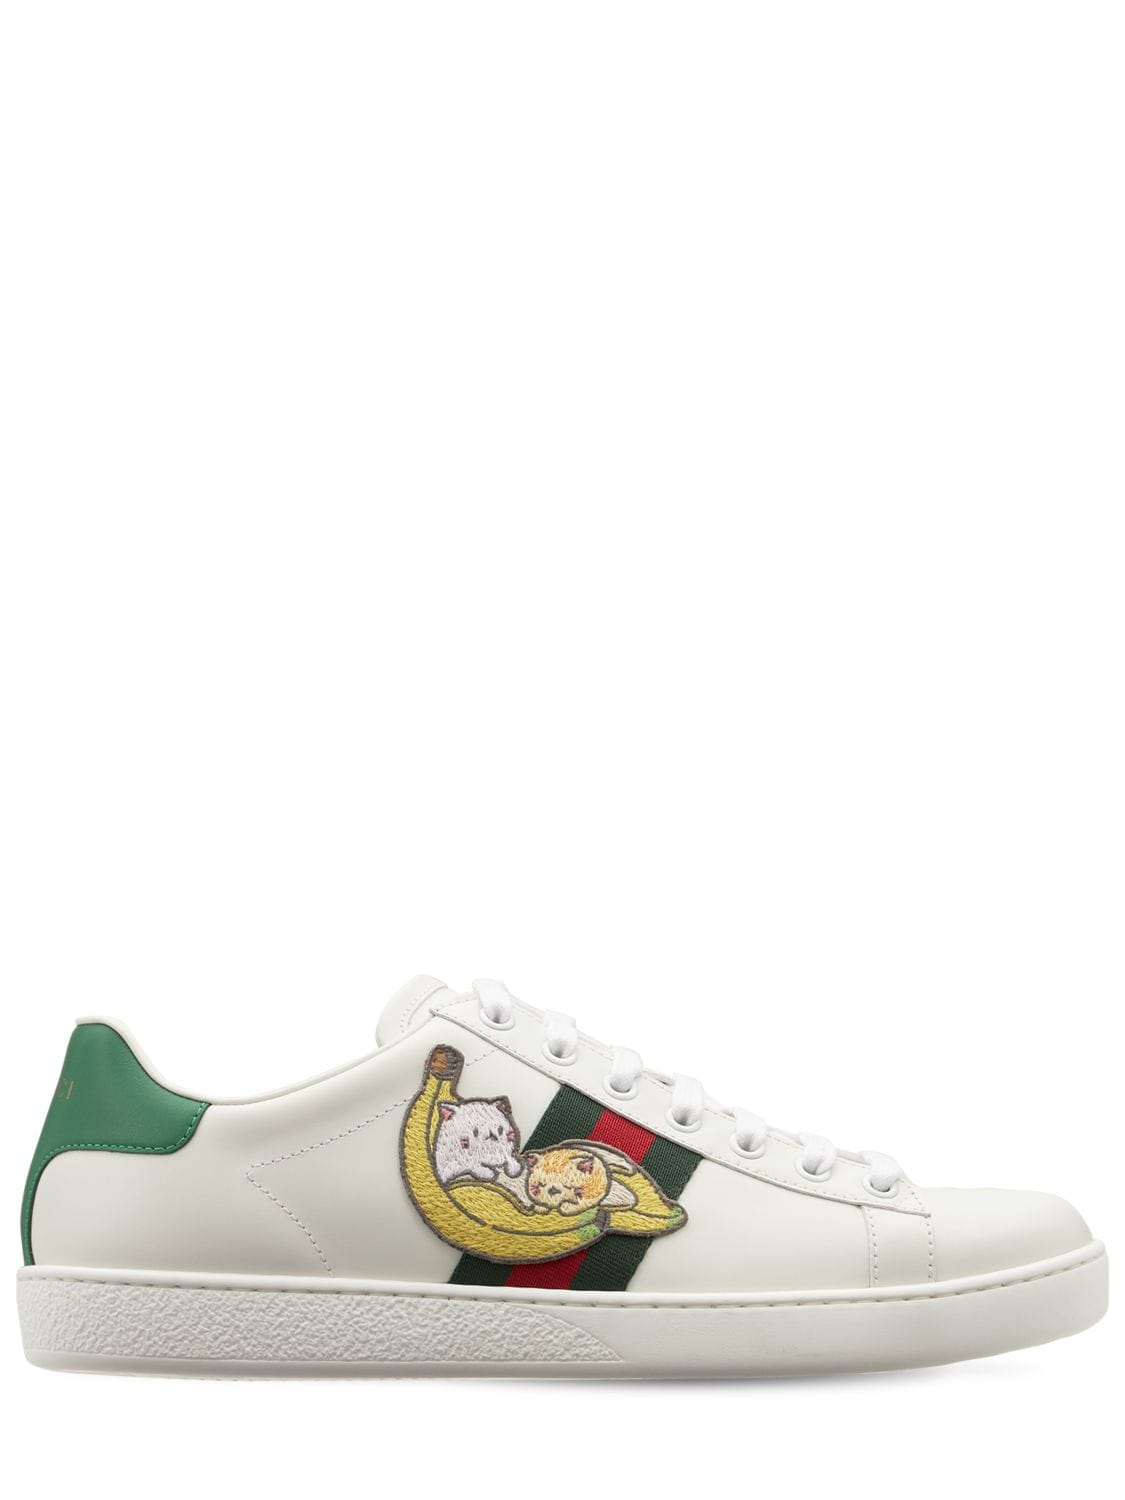 Image of 15mm Bananya X Gucci Ace Sneakers